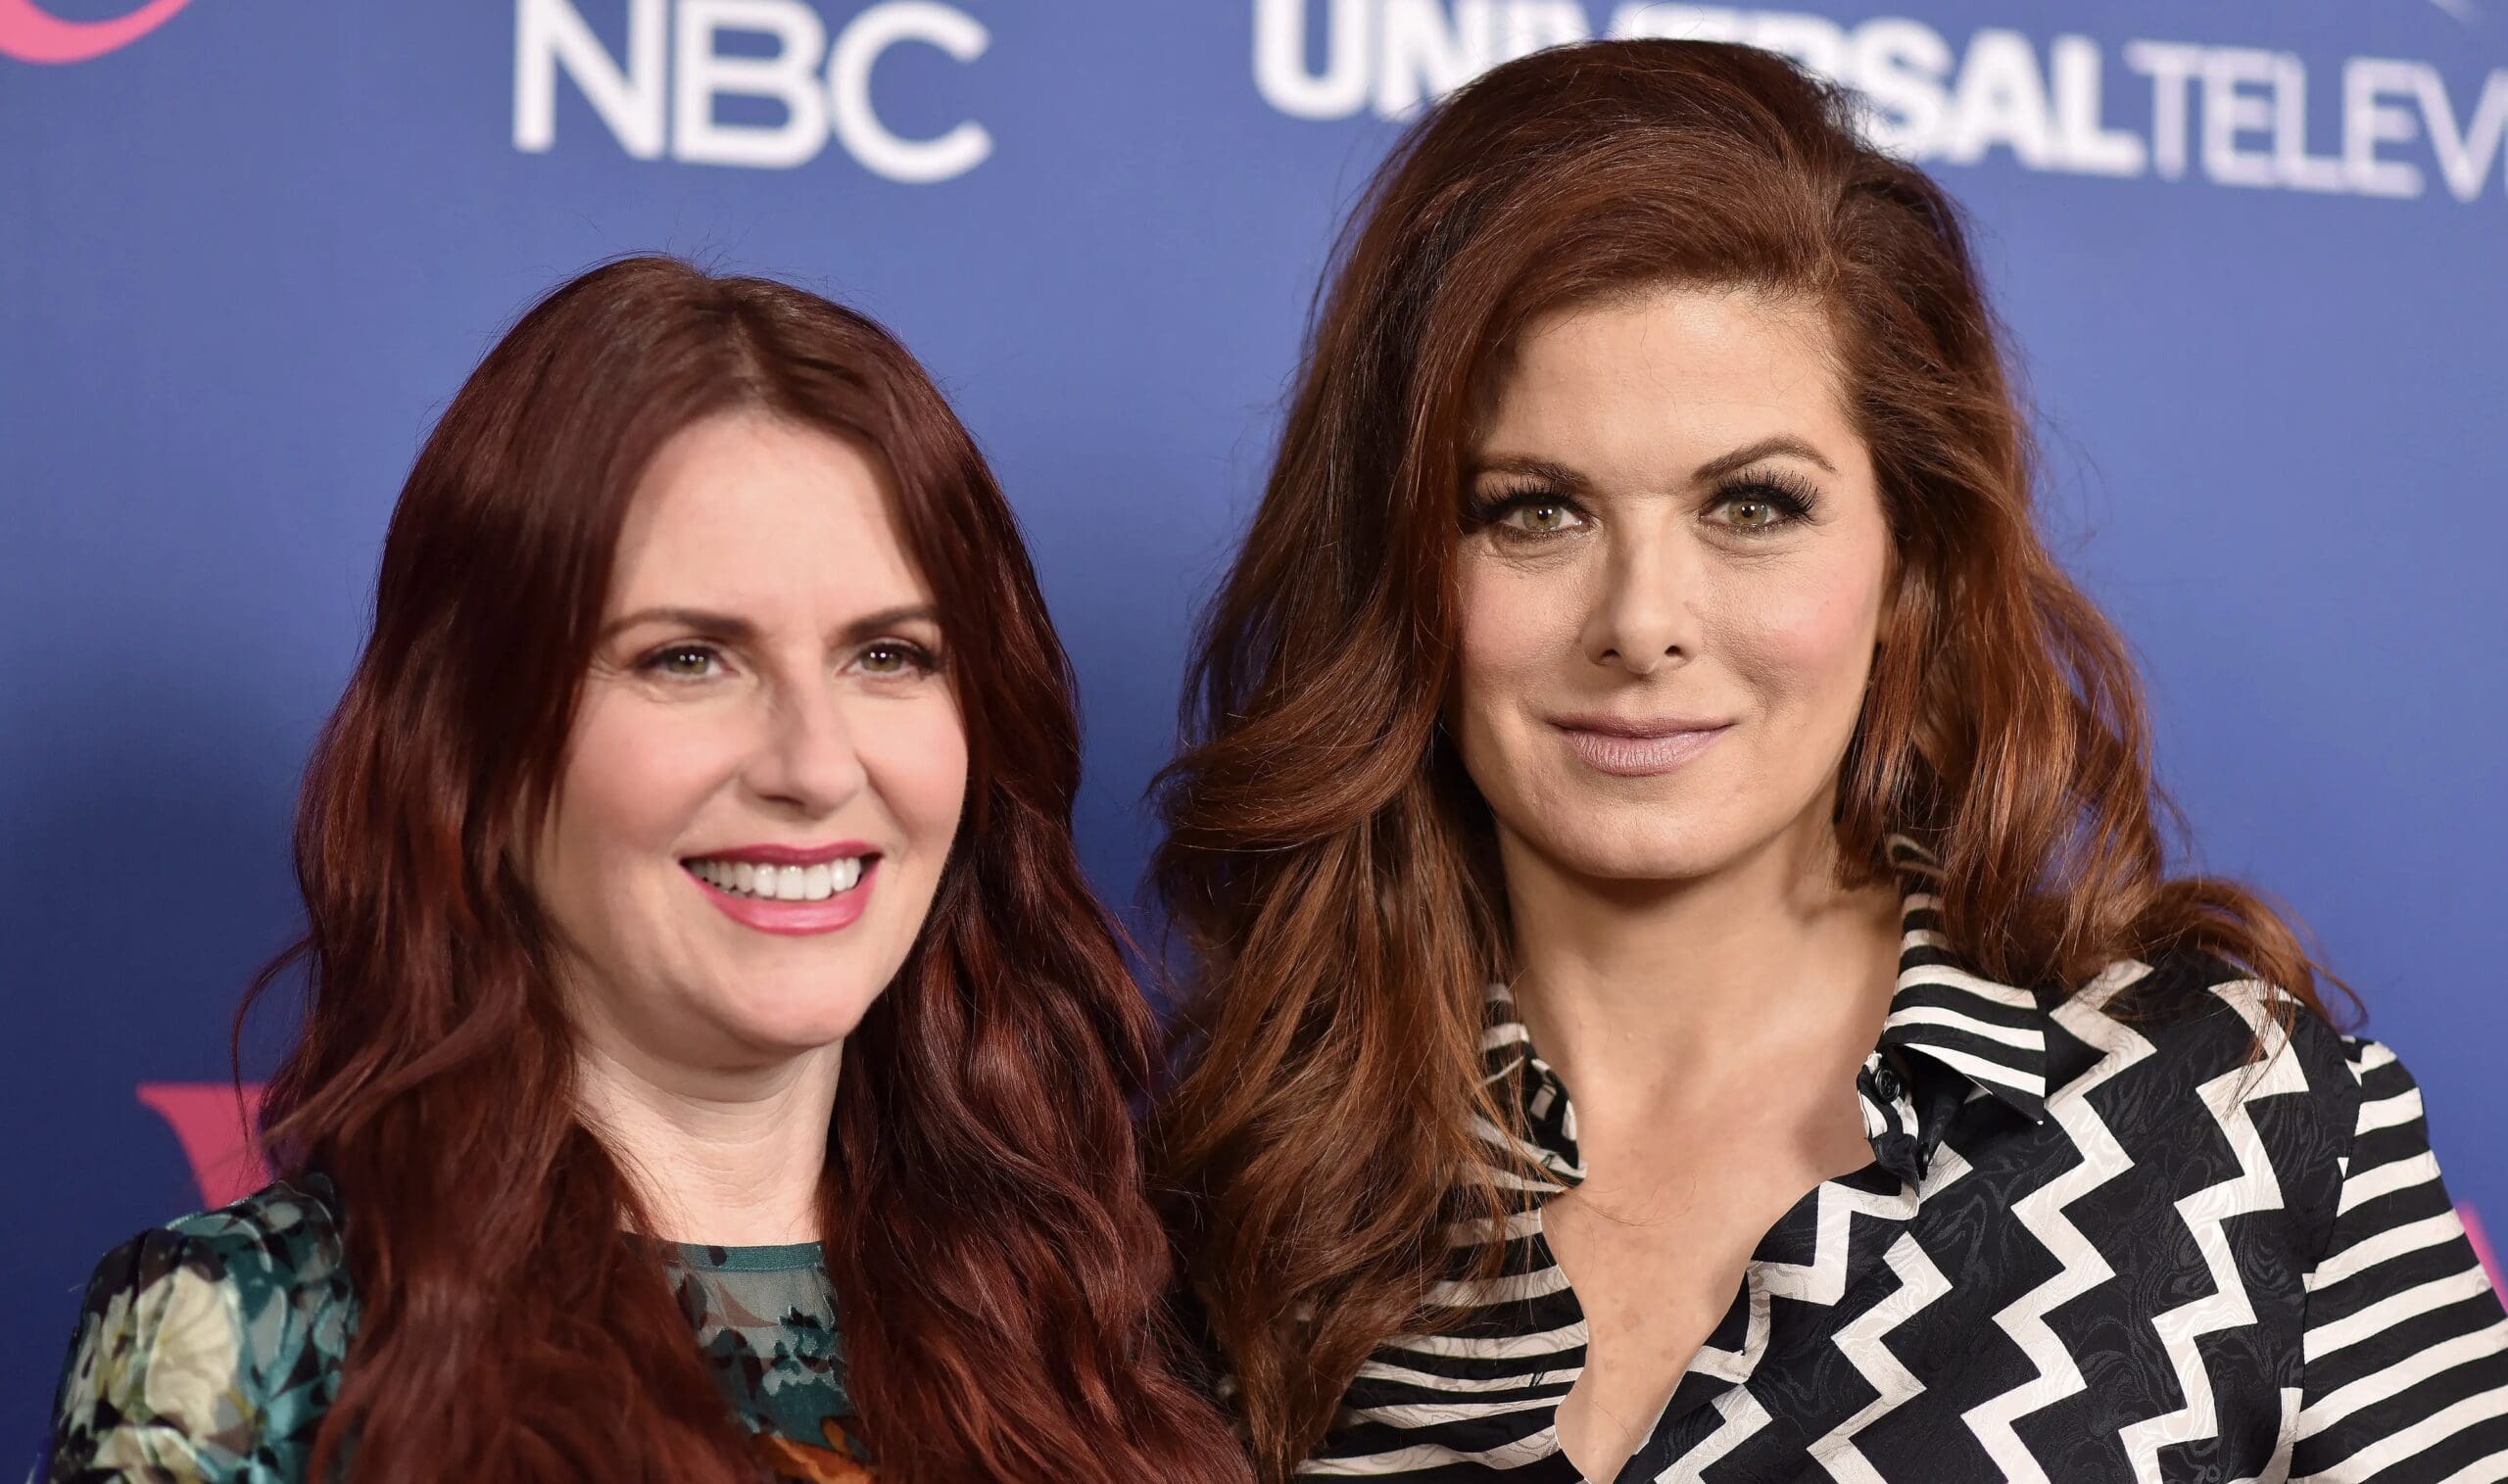 Debra Messing Reignites Feud With Former ‘Will and Grace’ Co-Star Megan Mullally for Being Friends With Susan Sarandon